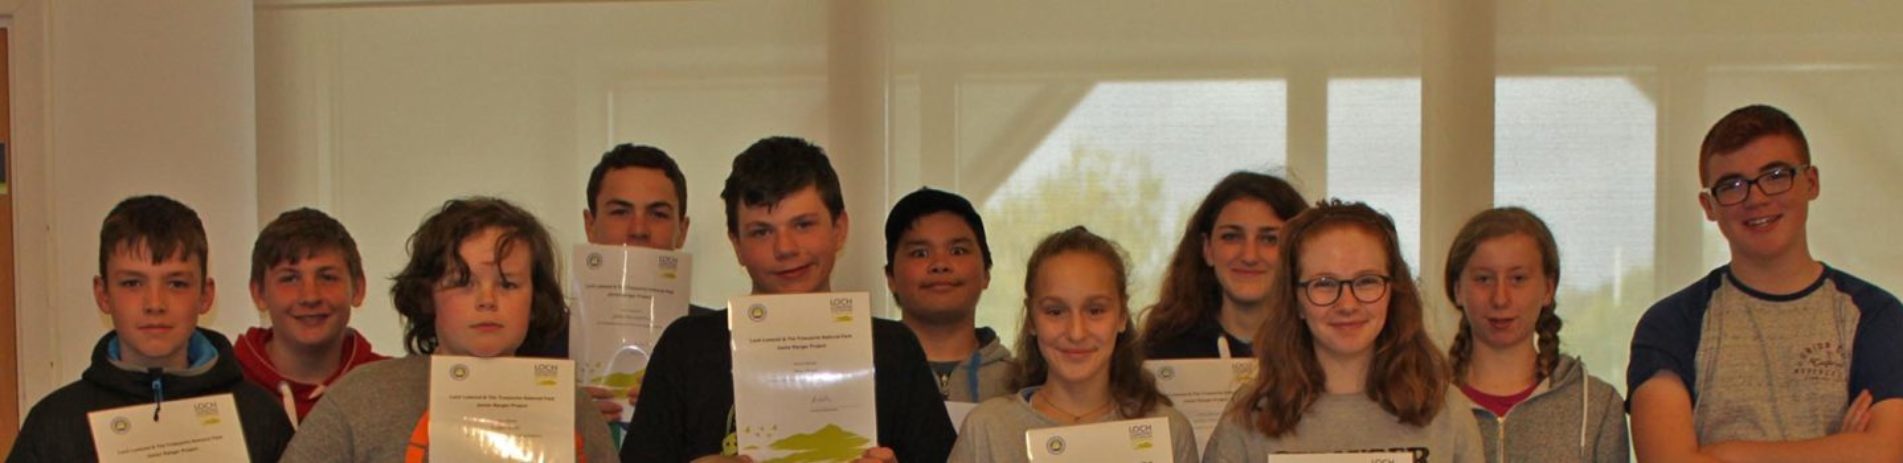 junior-rangers-students-holding-their-new-certificates-proudly